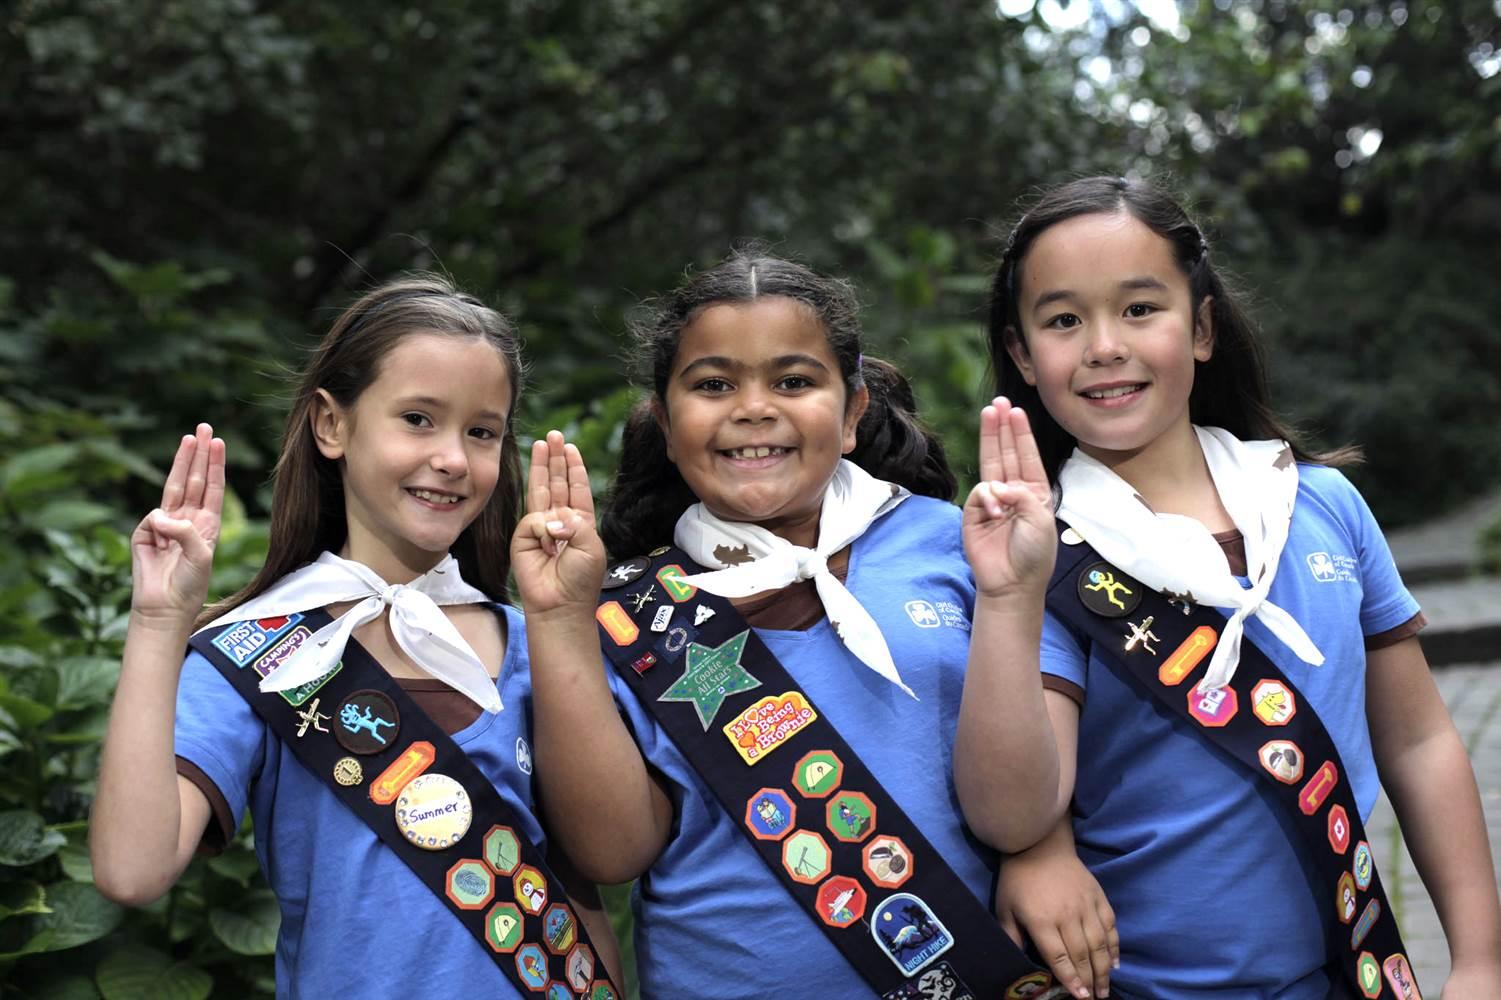 Members of the Girl Guides of Canada. Girl Guides of Canada via Flickr